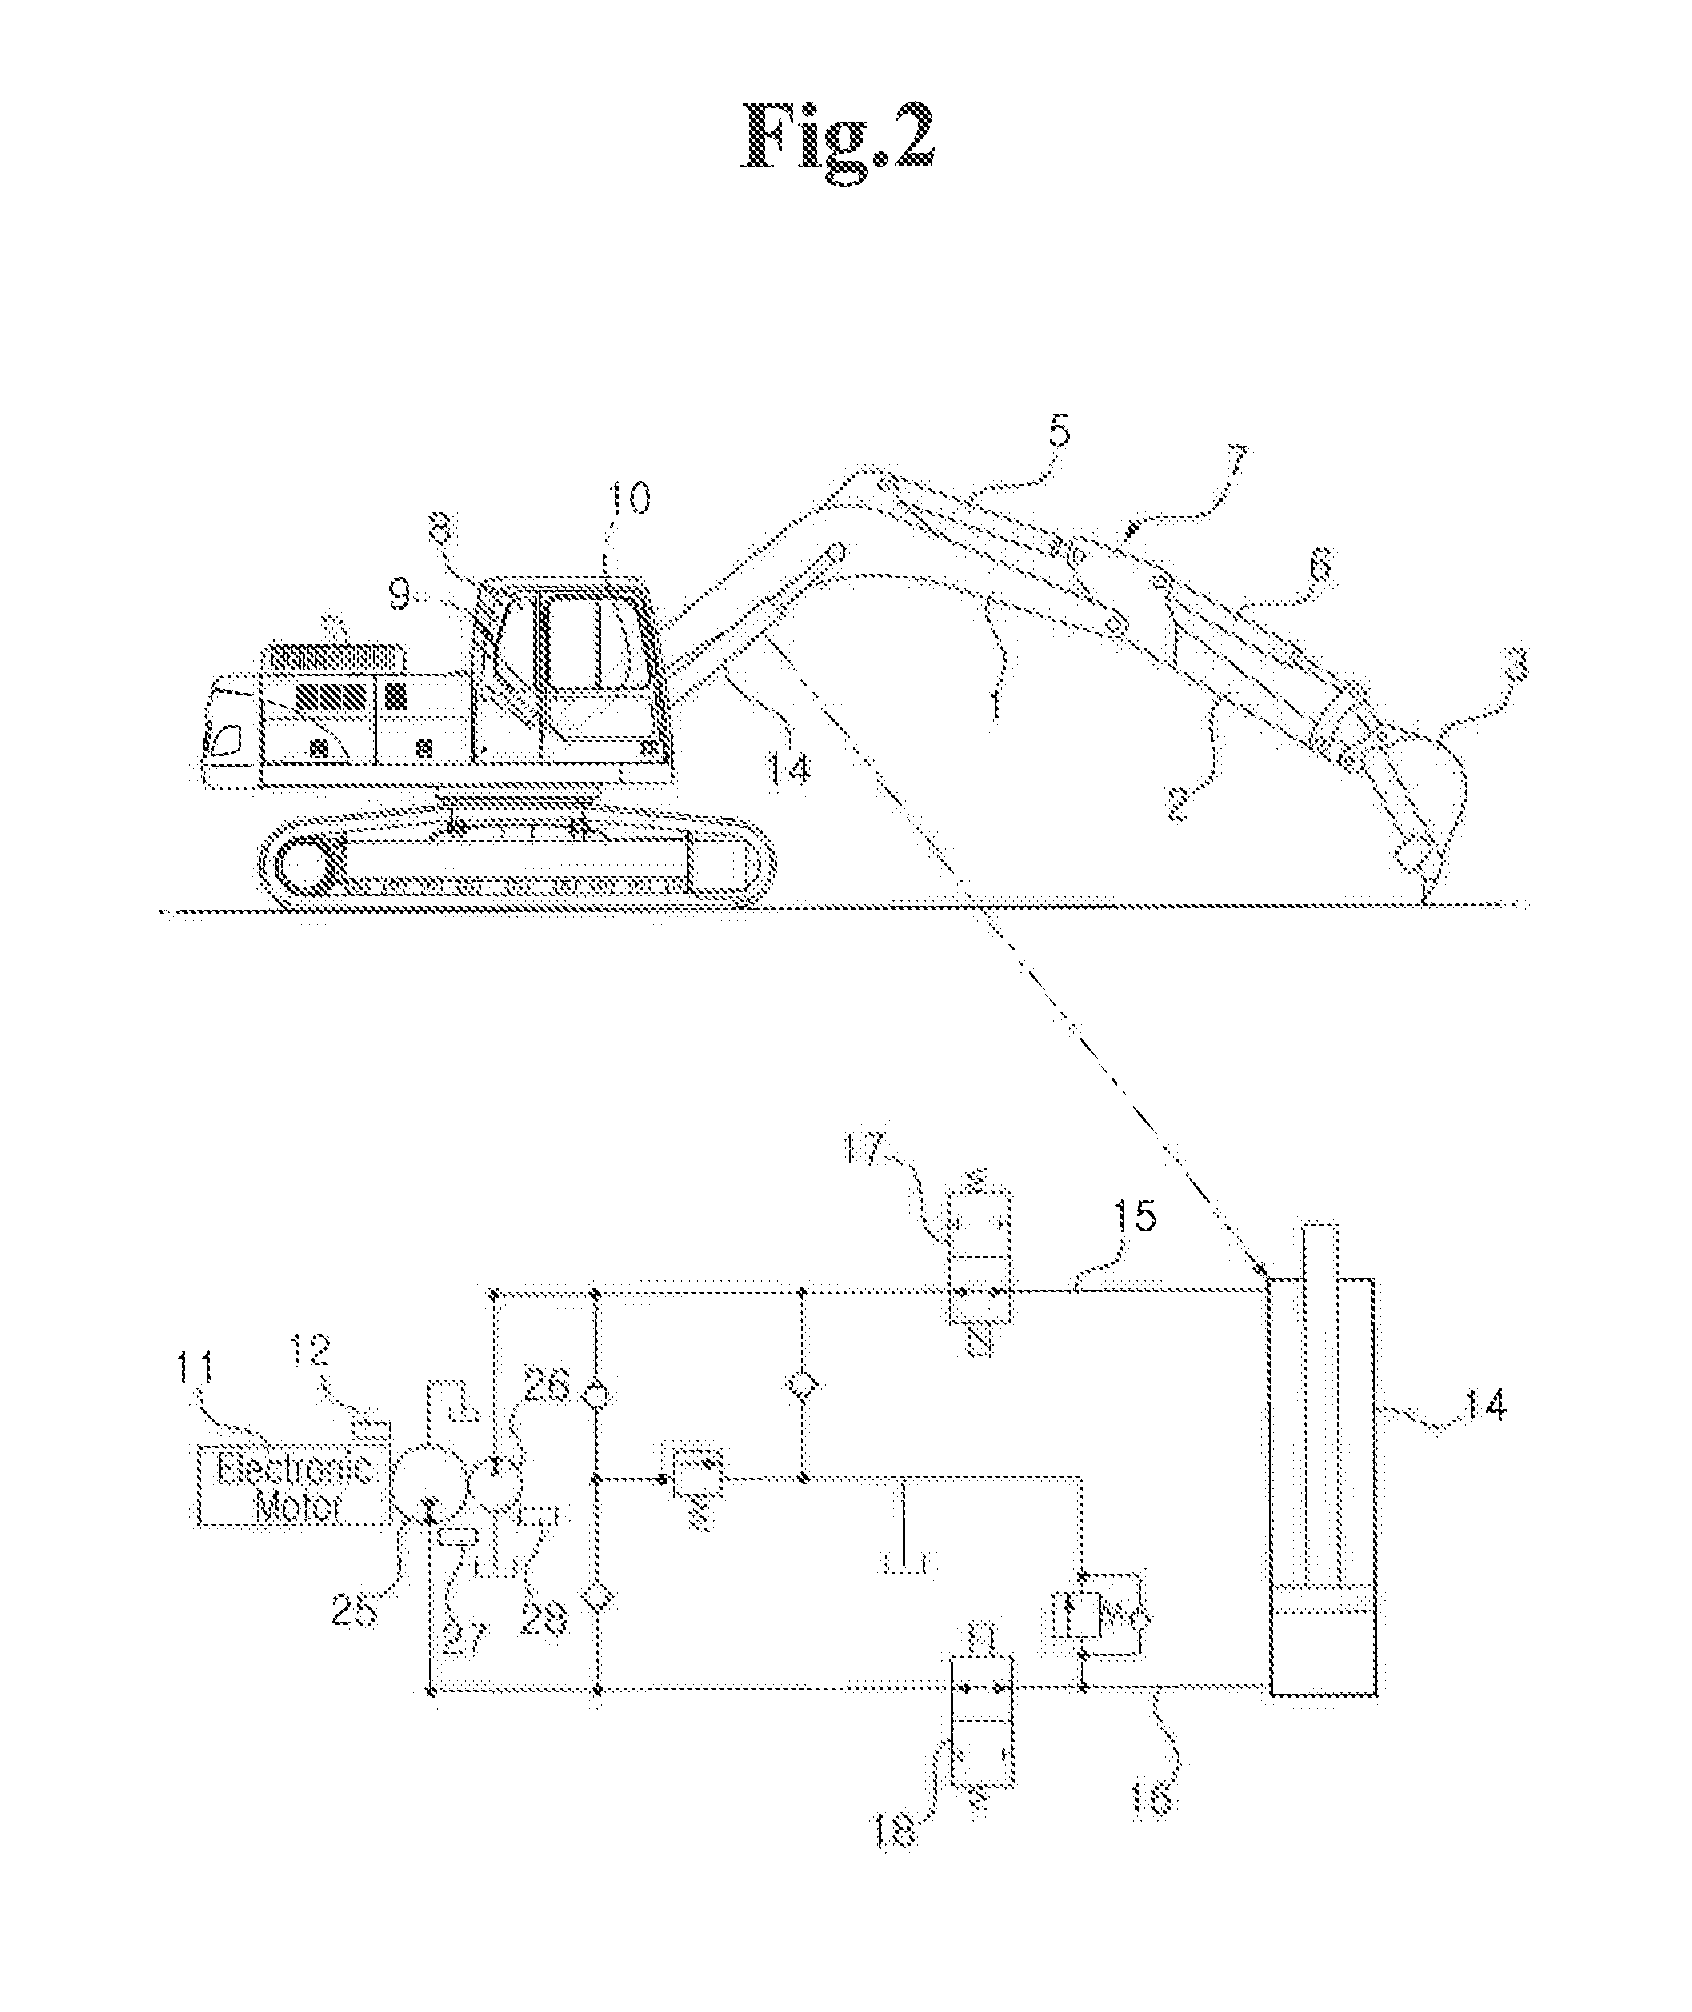 Hybrid excavator including a fast-stopping apparatus for a hybrid actuator